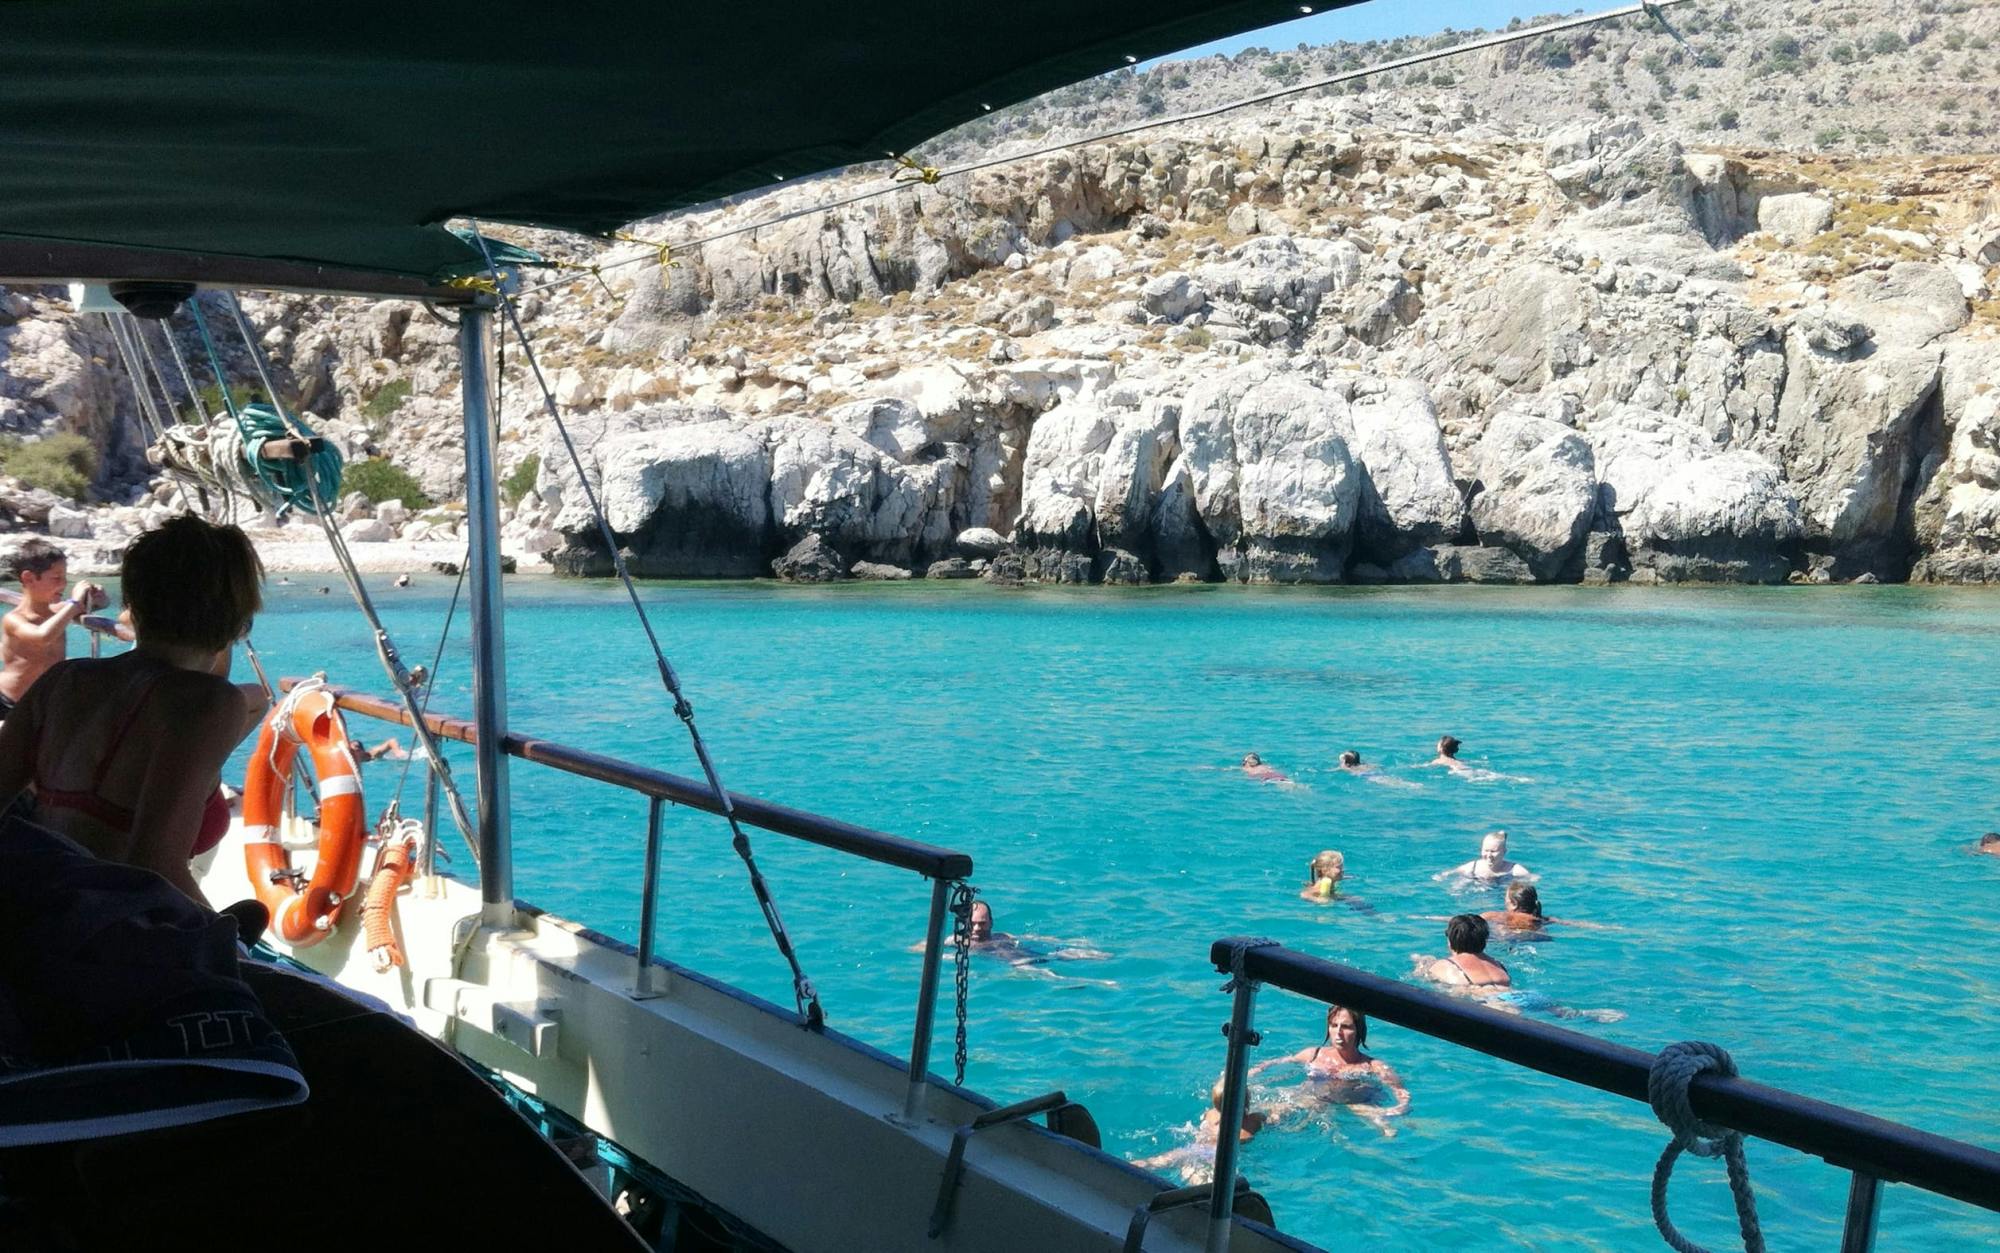 Lindos by Boat from Kolymbia Ticket